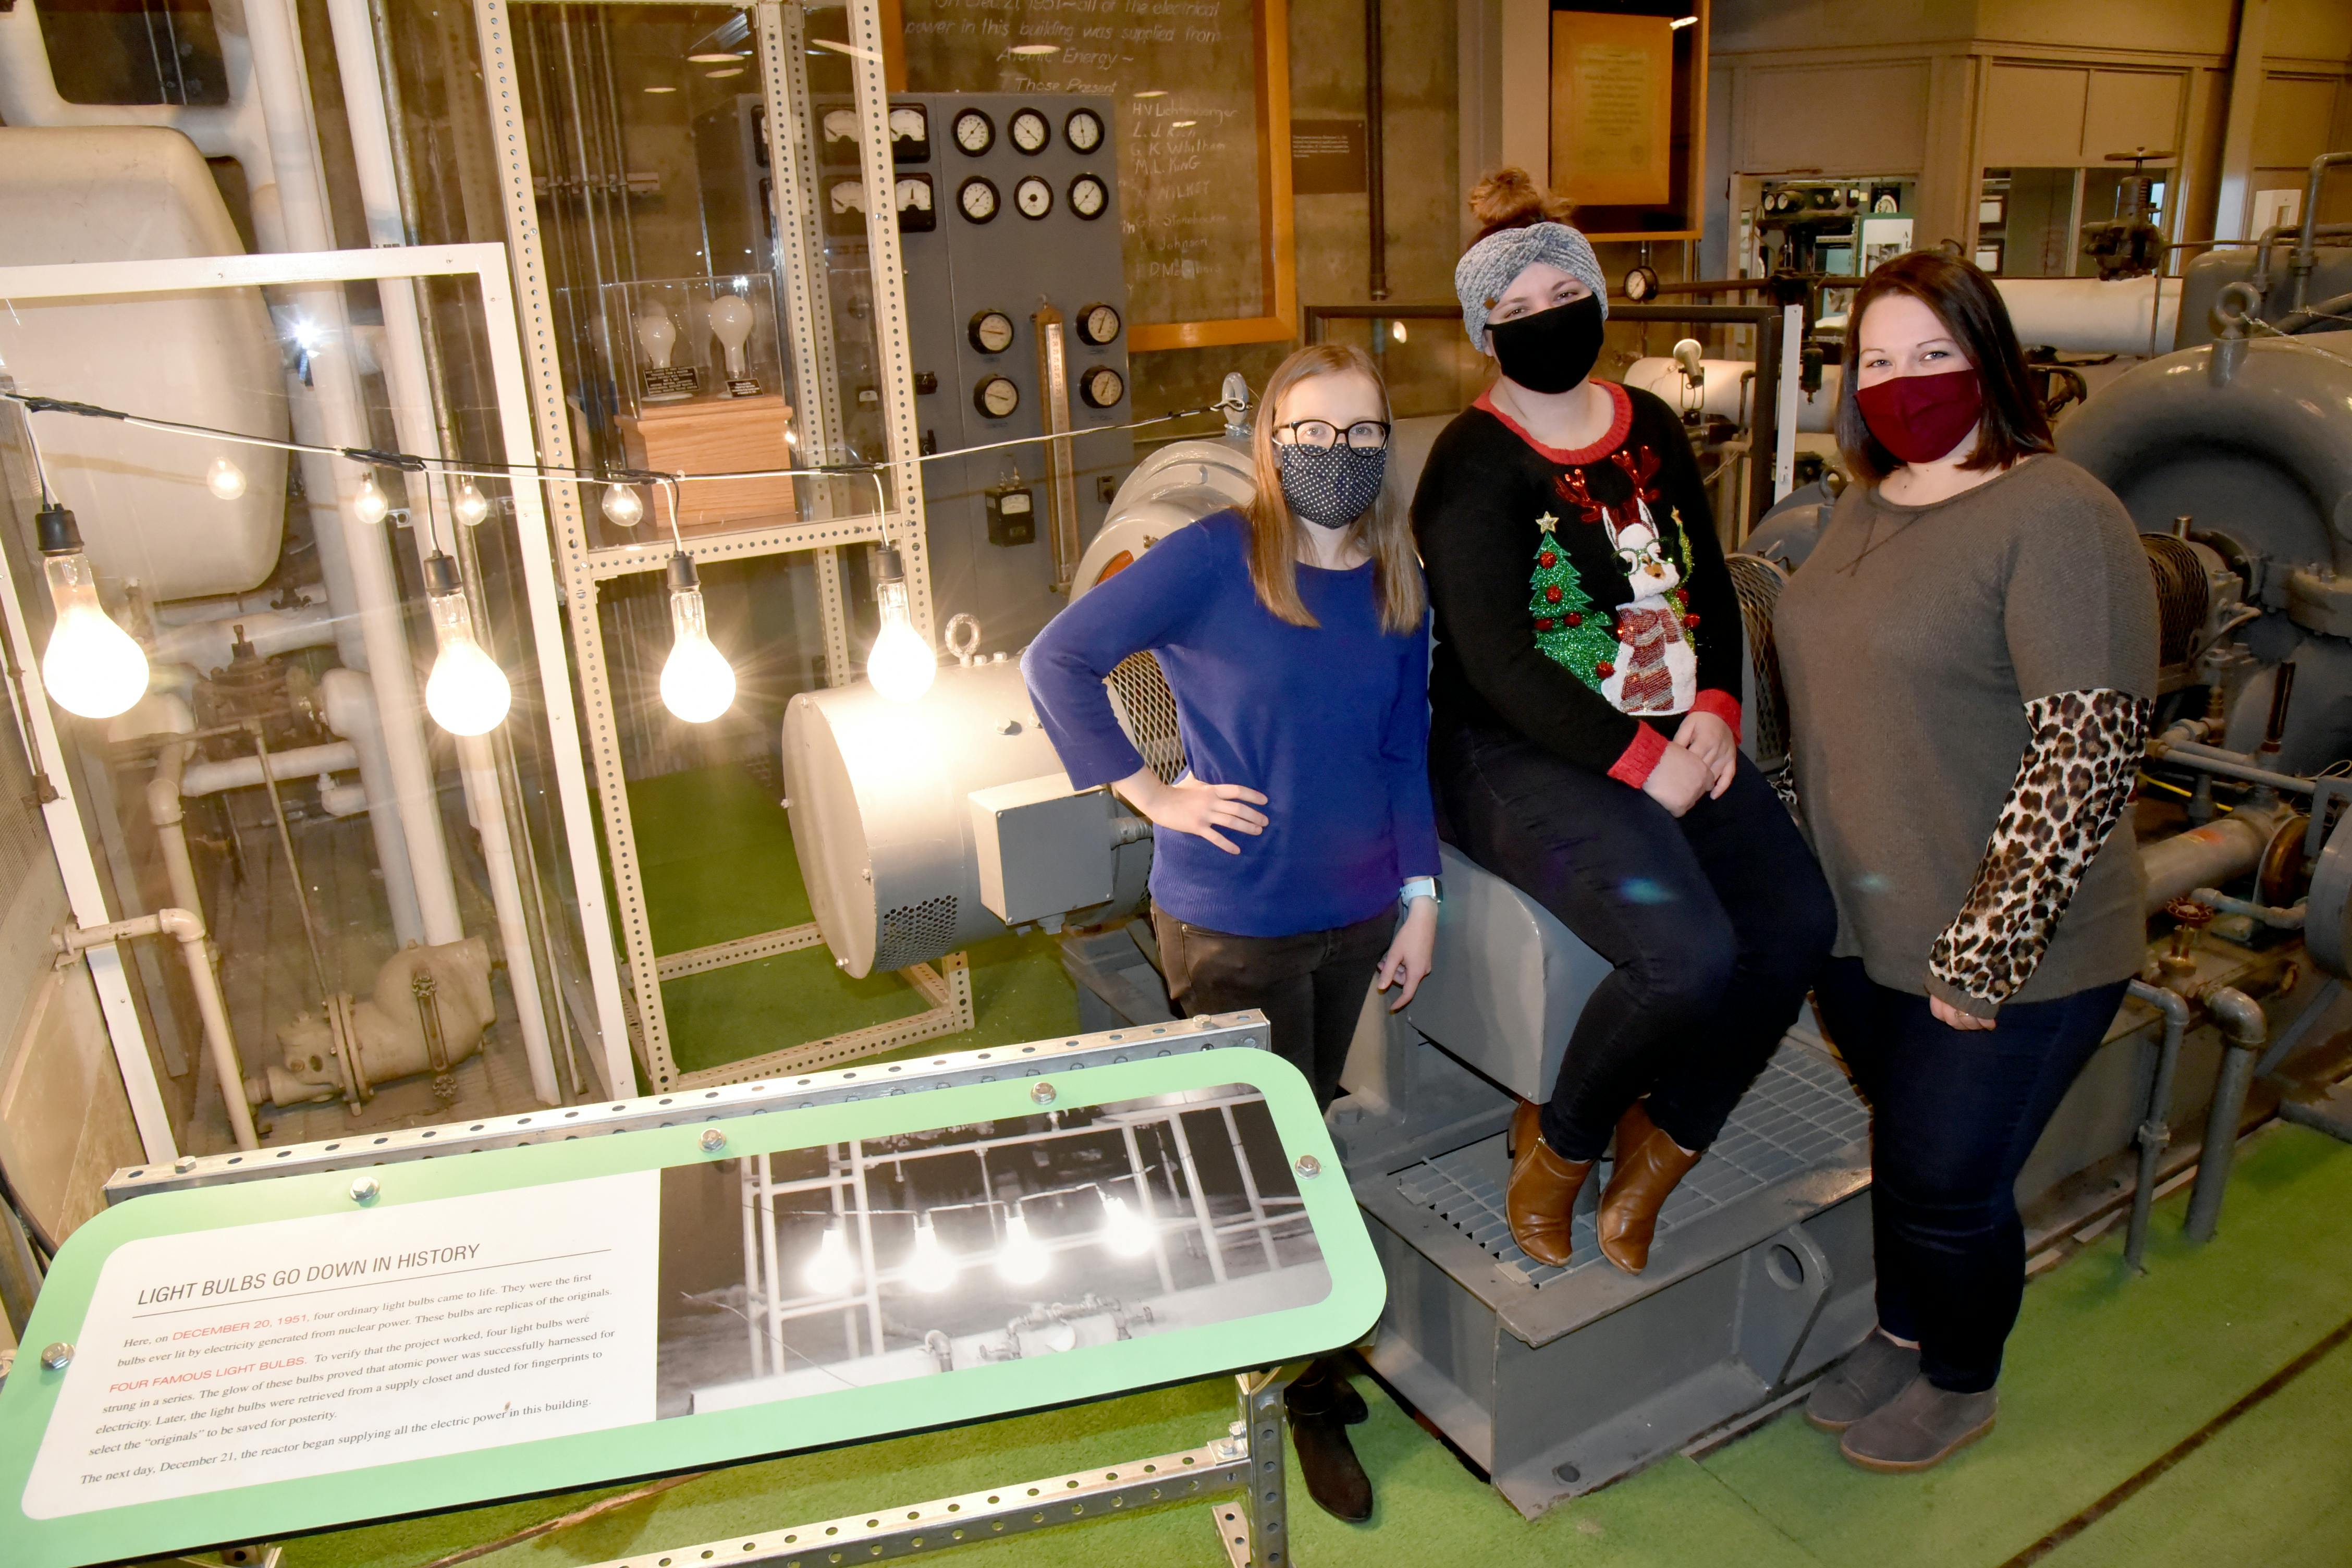 EBR 1, EBR-I, EBR 1 museum, Idaho museum, nuclear history, nuclear energy history, three women standing in an industrial setting next to four lightbulbs